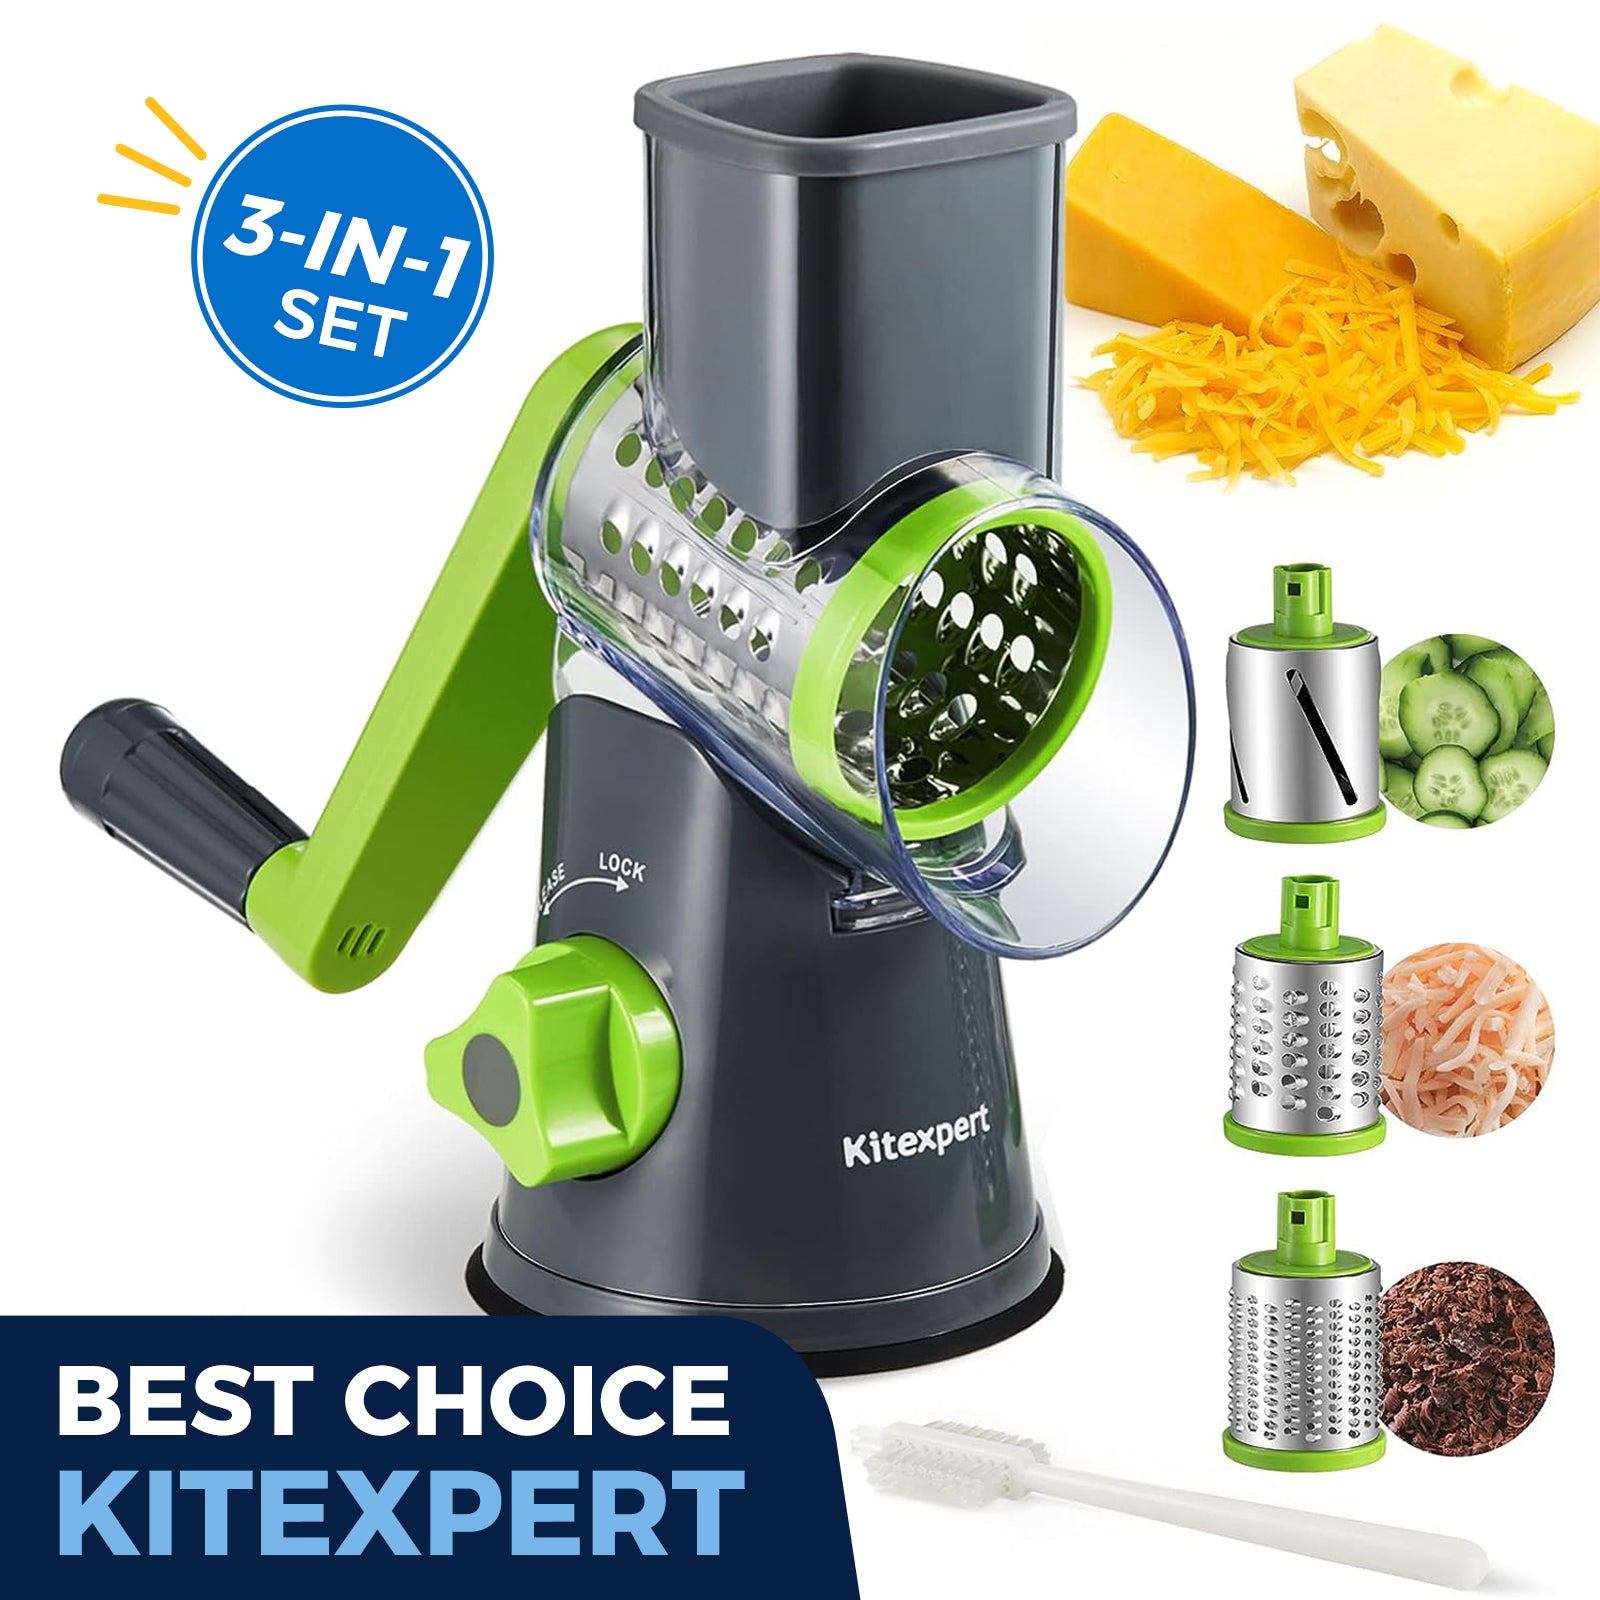 Cheese Grater with Handle, Rotary Cheese Grater with 3 Interchangeable Blades, Cheese Shredder Handheld with Strong Suction Base, Vegetable Slicer for Fruit, Nuts, Chocolate(Grey)